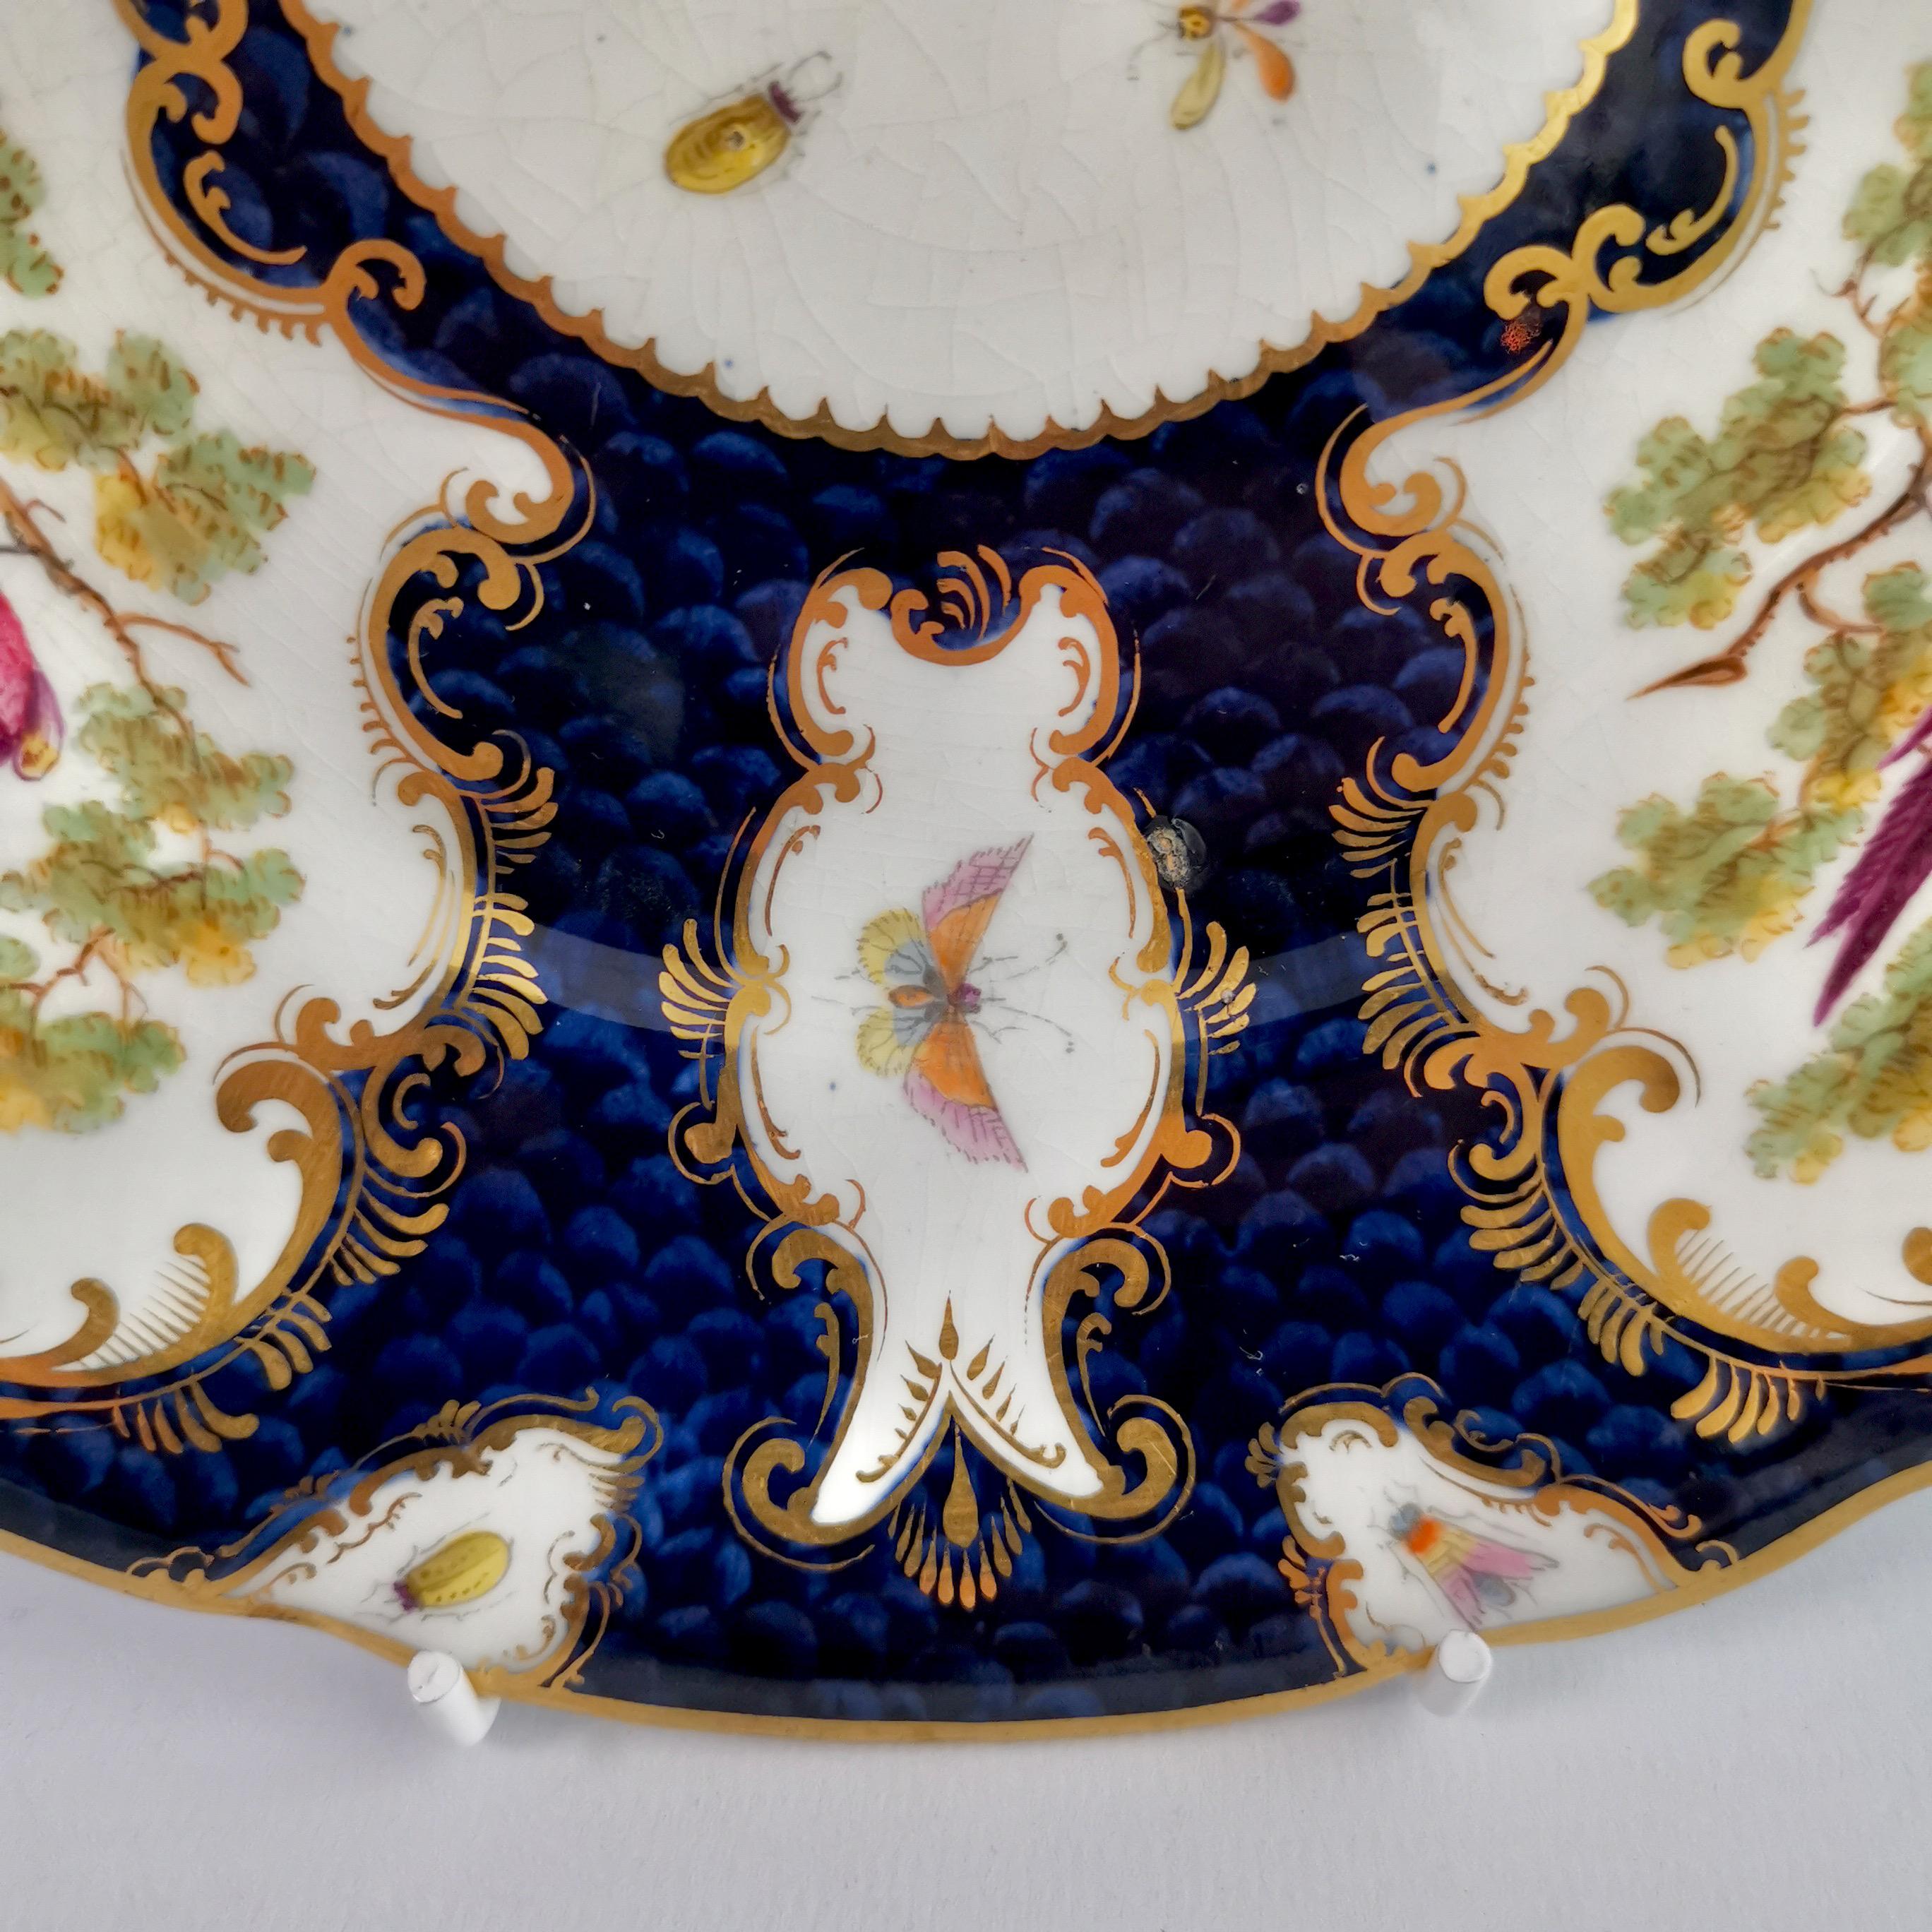 Grainger Worcester Porcelain Plate, Blue Sèvres Birds and Insects circa 1880 '2' 1